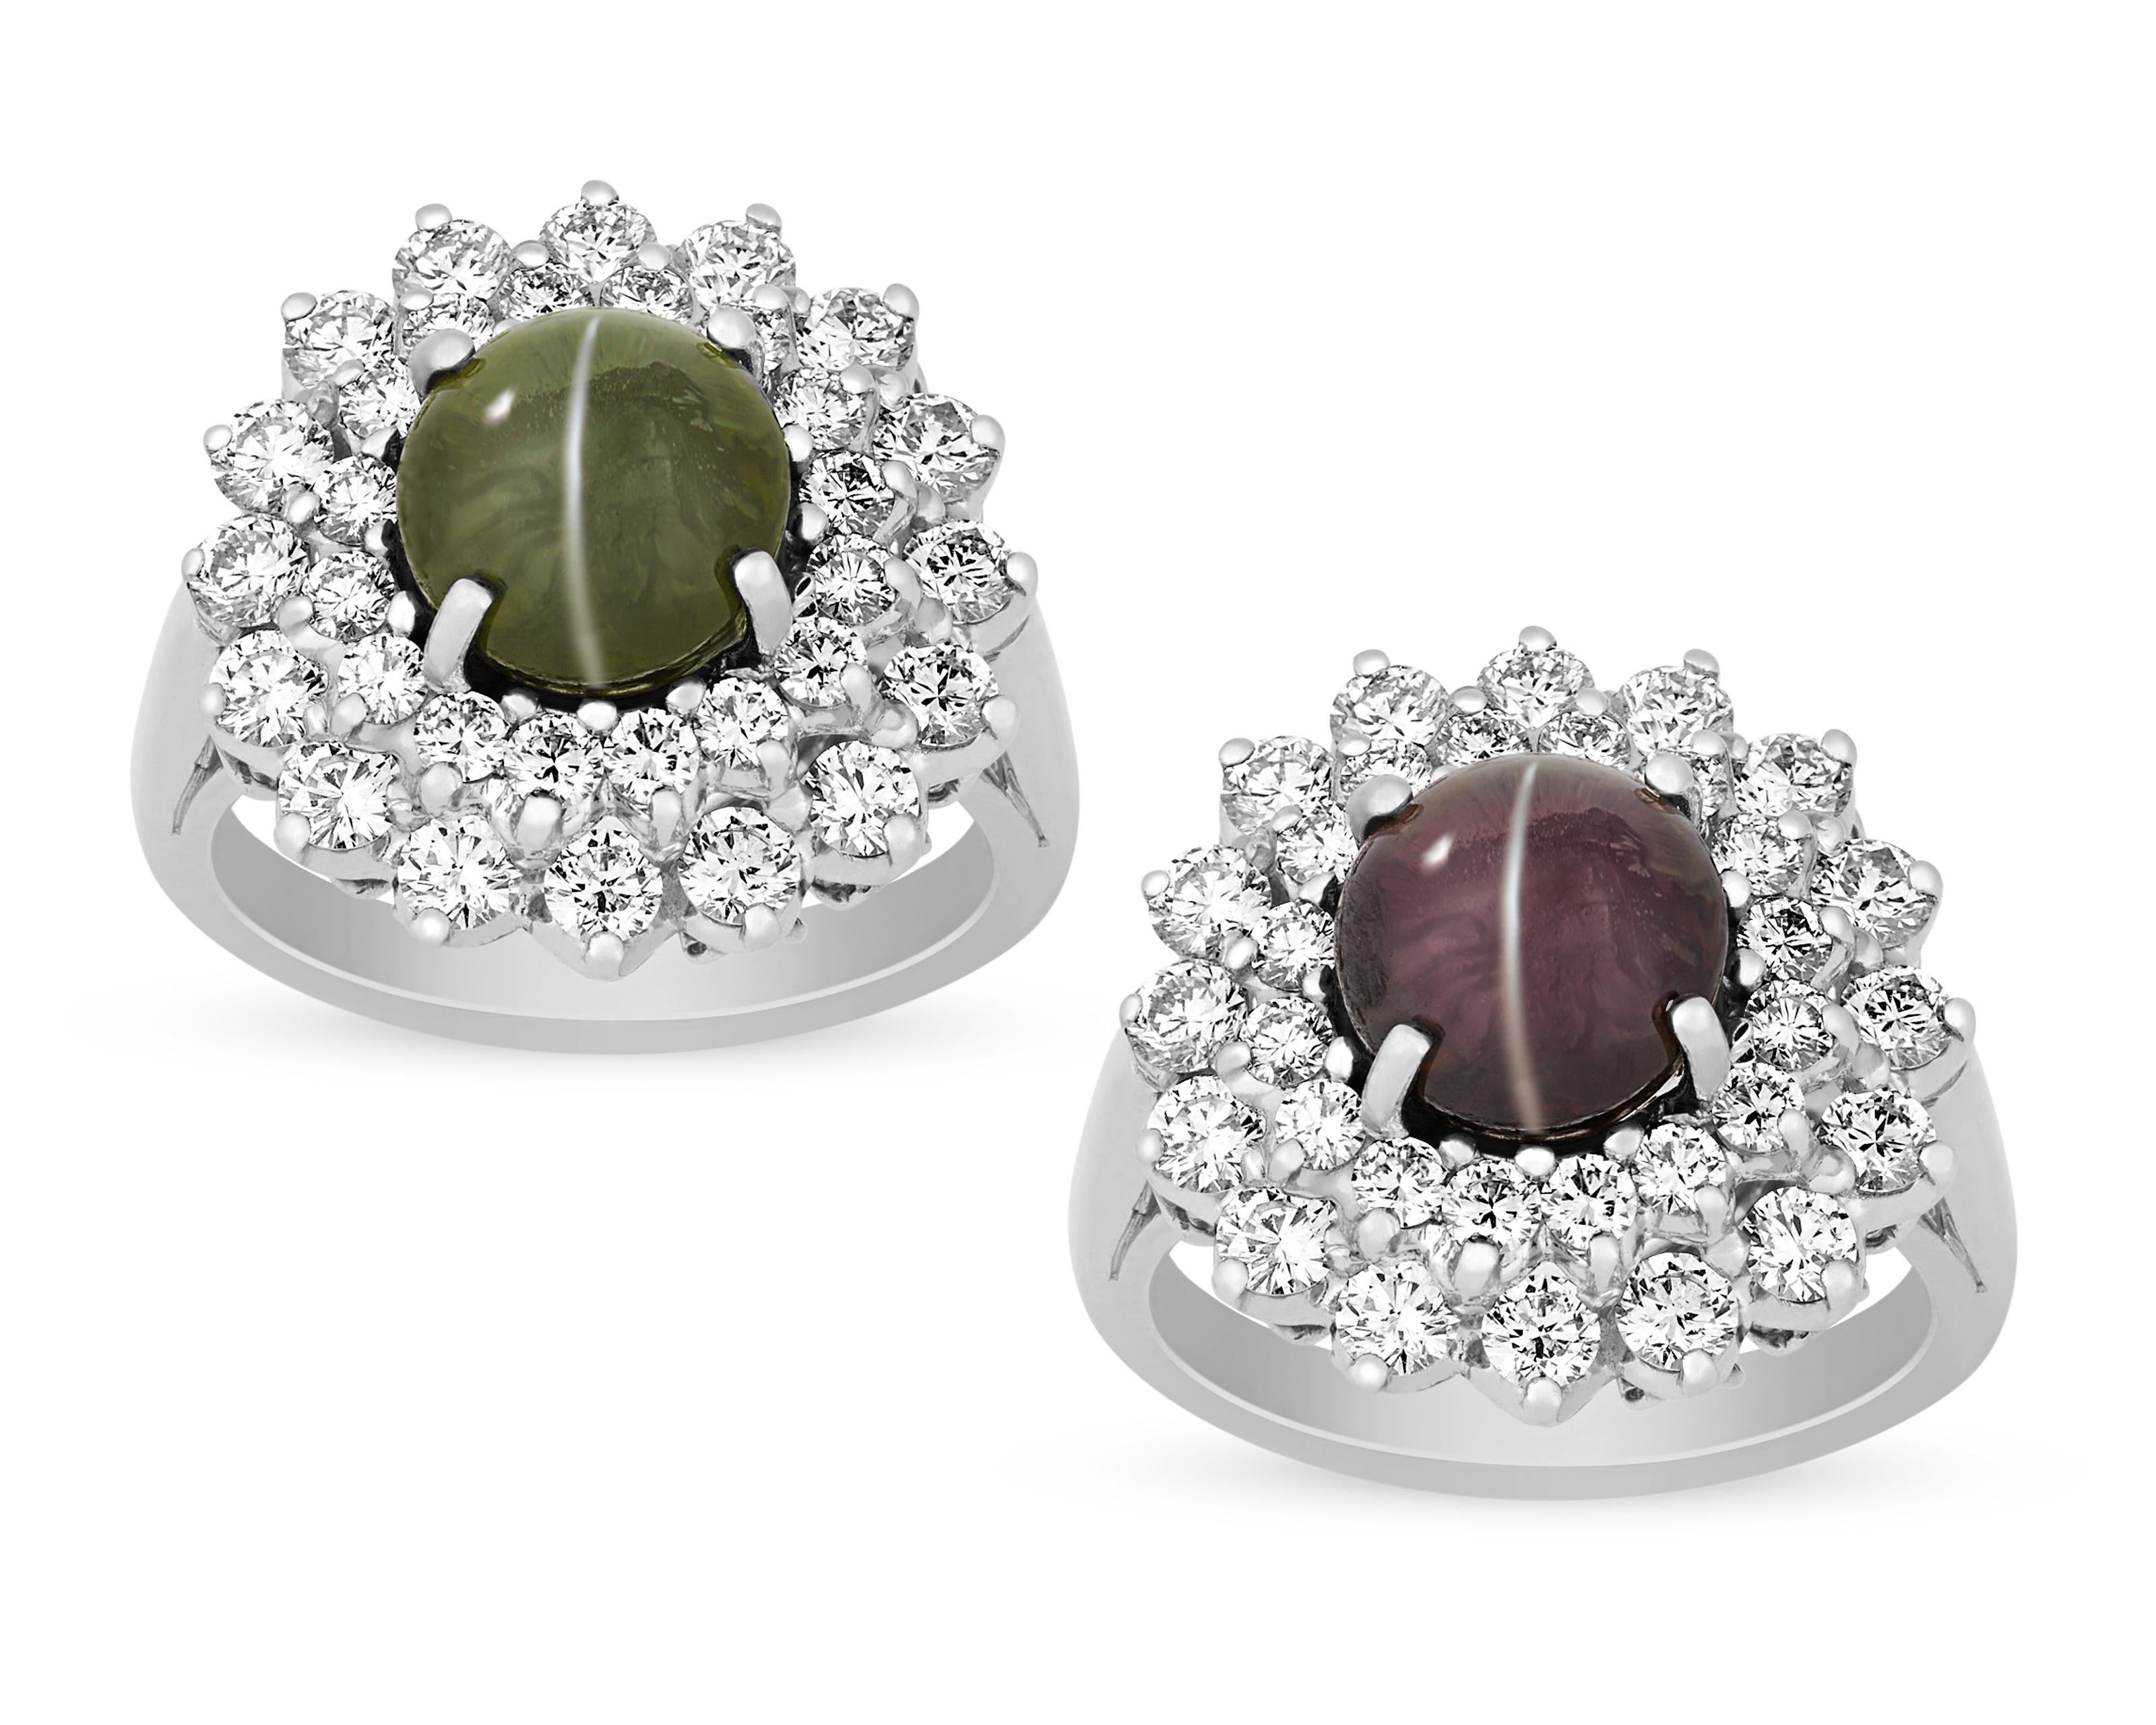 Weighing 4.73 carats, the captivating cat's eye alexandrite in this Oscar Heyman creation exhibits the unique color change for which these rare stones are legendary. The cabochon stone displays a lovely yellowish-green hue in daylight and a